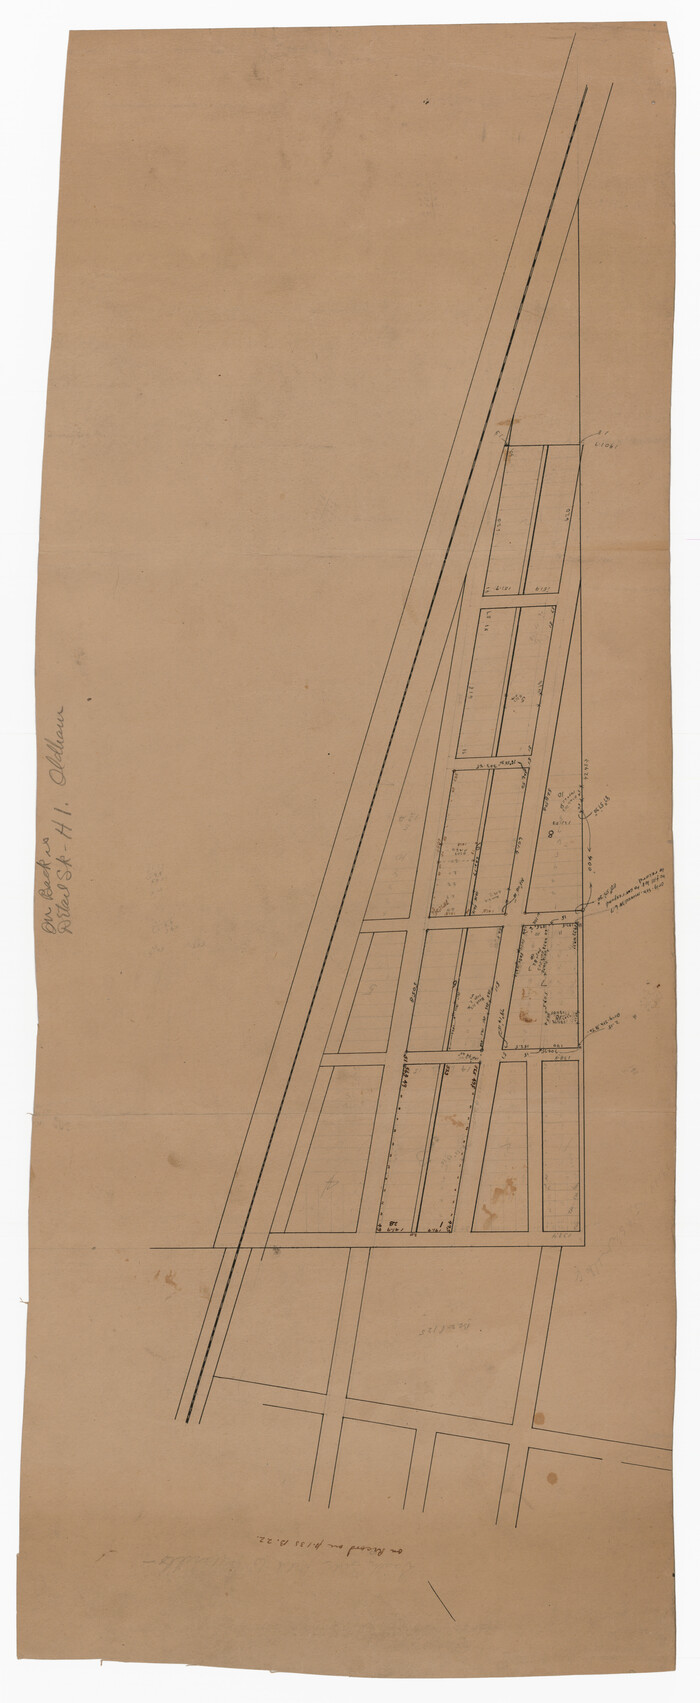 92087, [Sketch showing town lots near railroad track], Twichell Survey Records